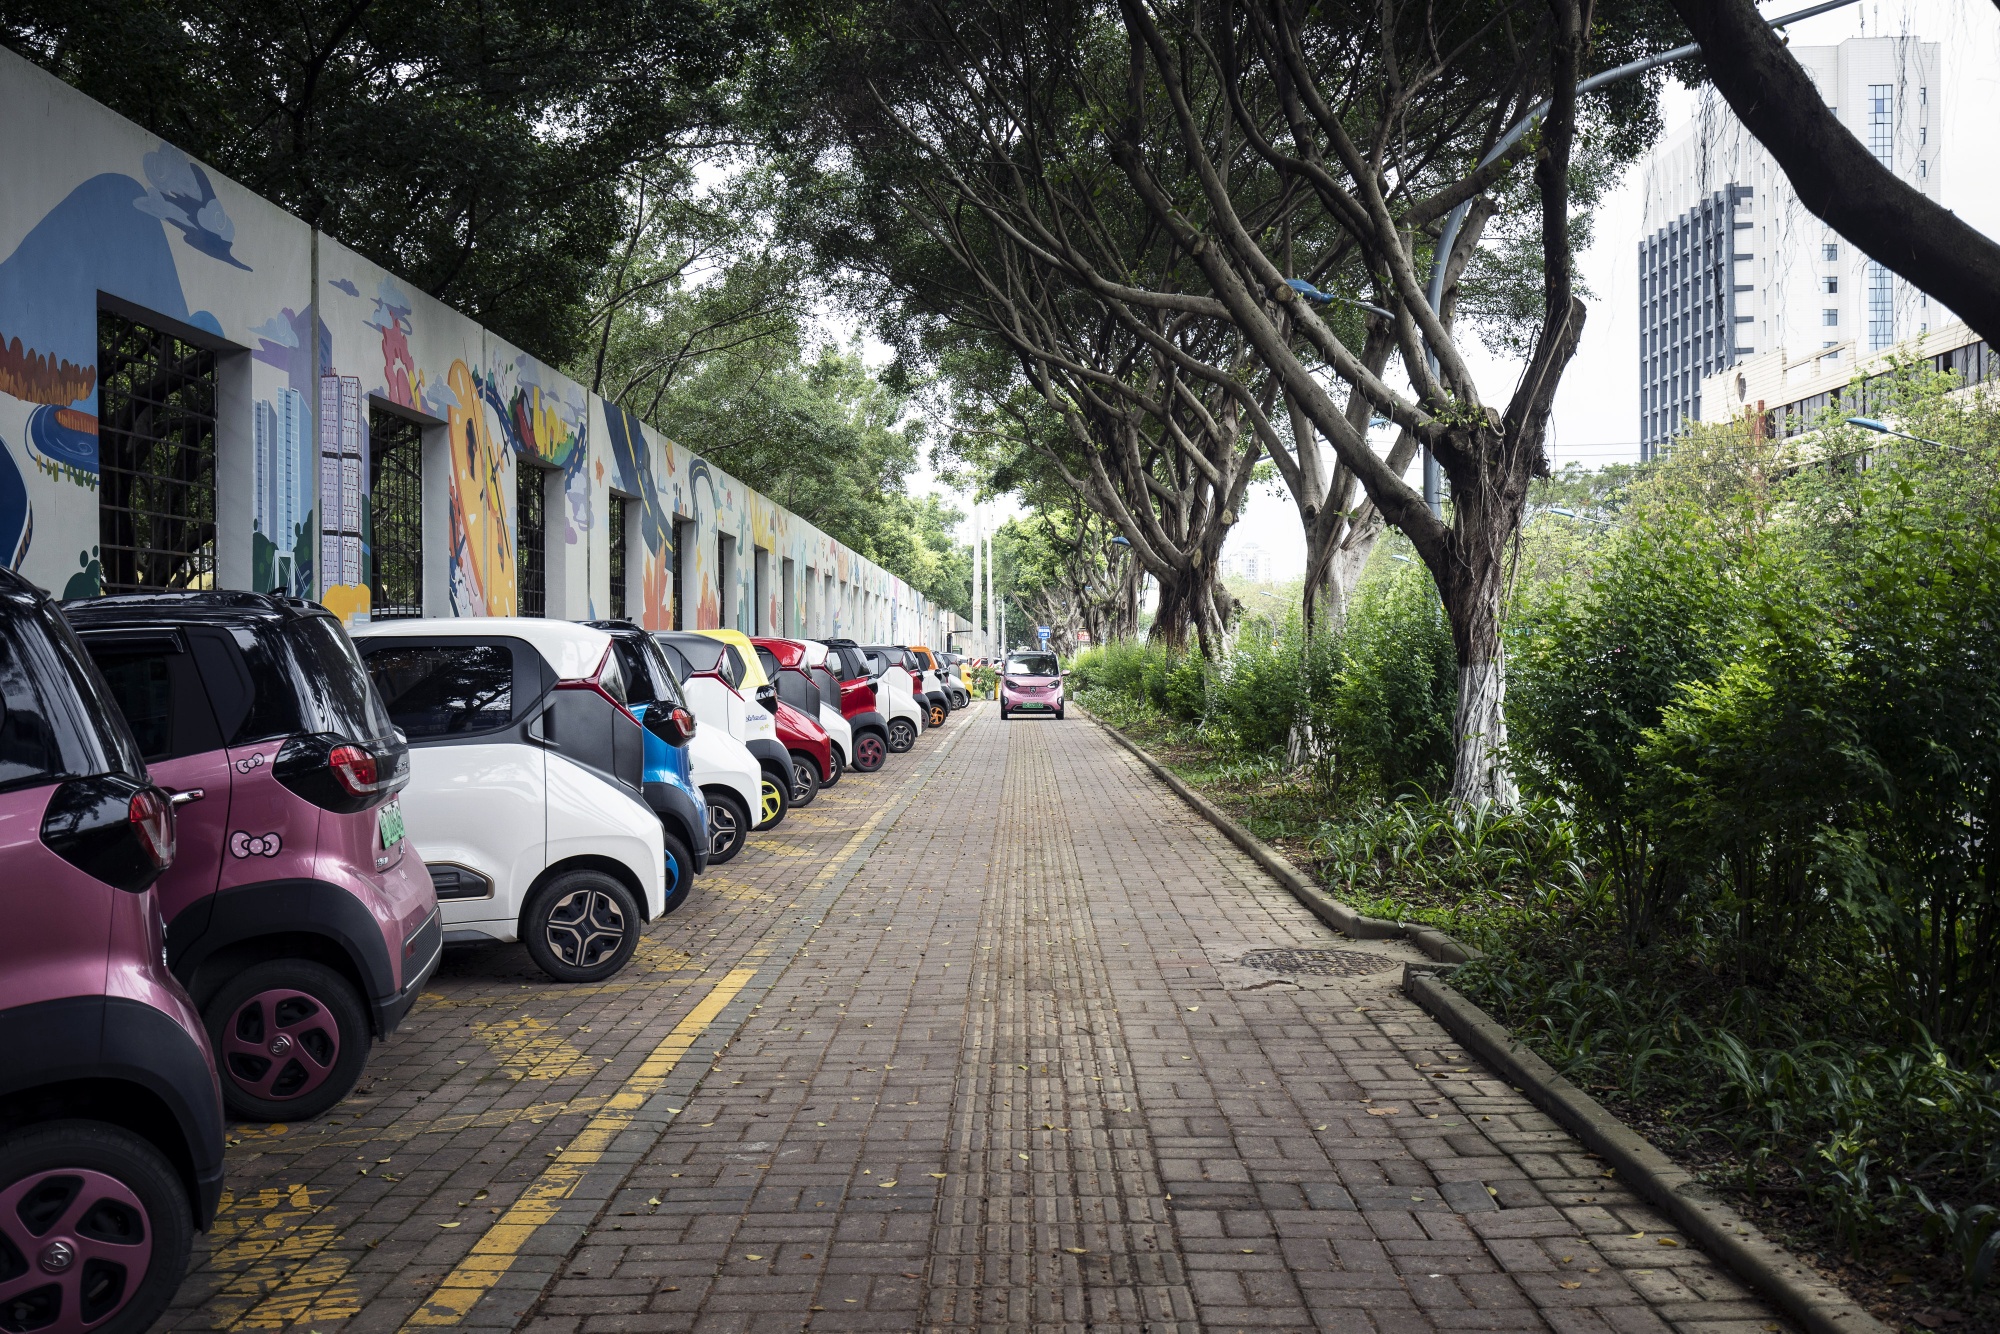 Small EVs, overwhelmingly produced locally by SAIC-GM-Wuling Automobile, sit in a curb-side parking lot in Liuzhou, China, on&nbsp;May 17.